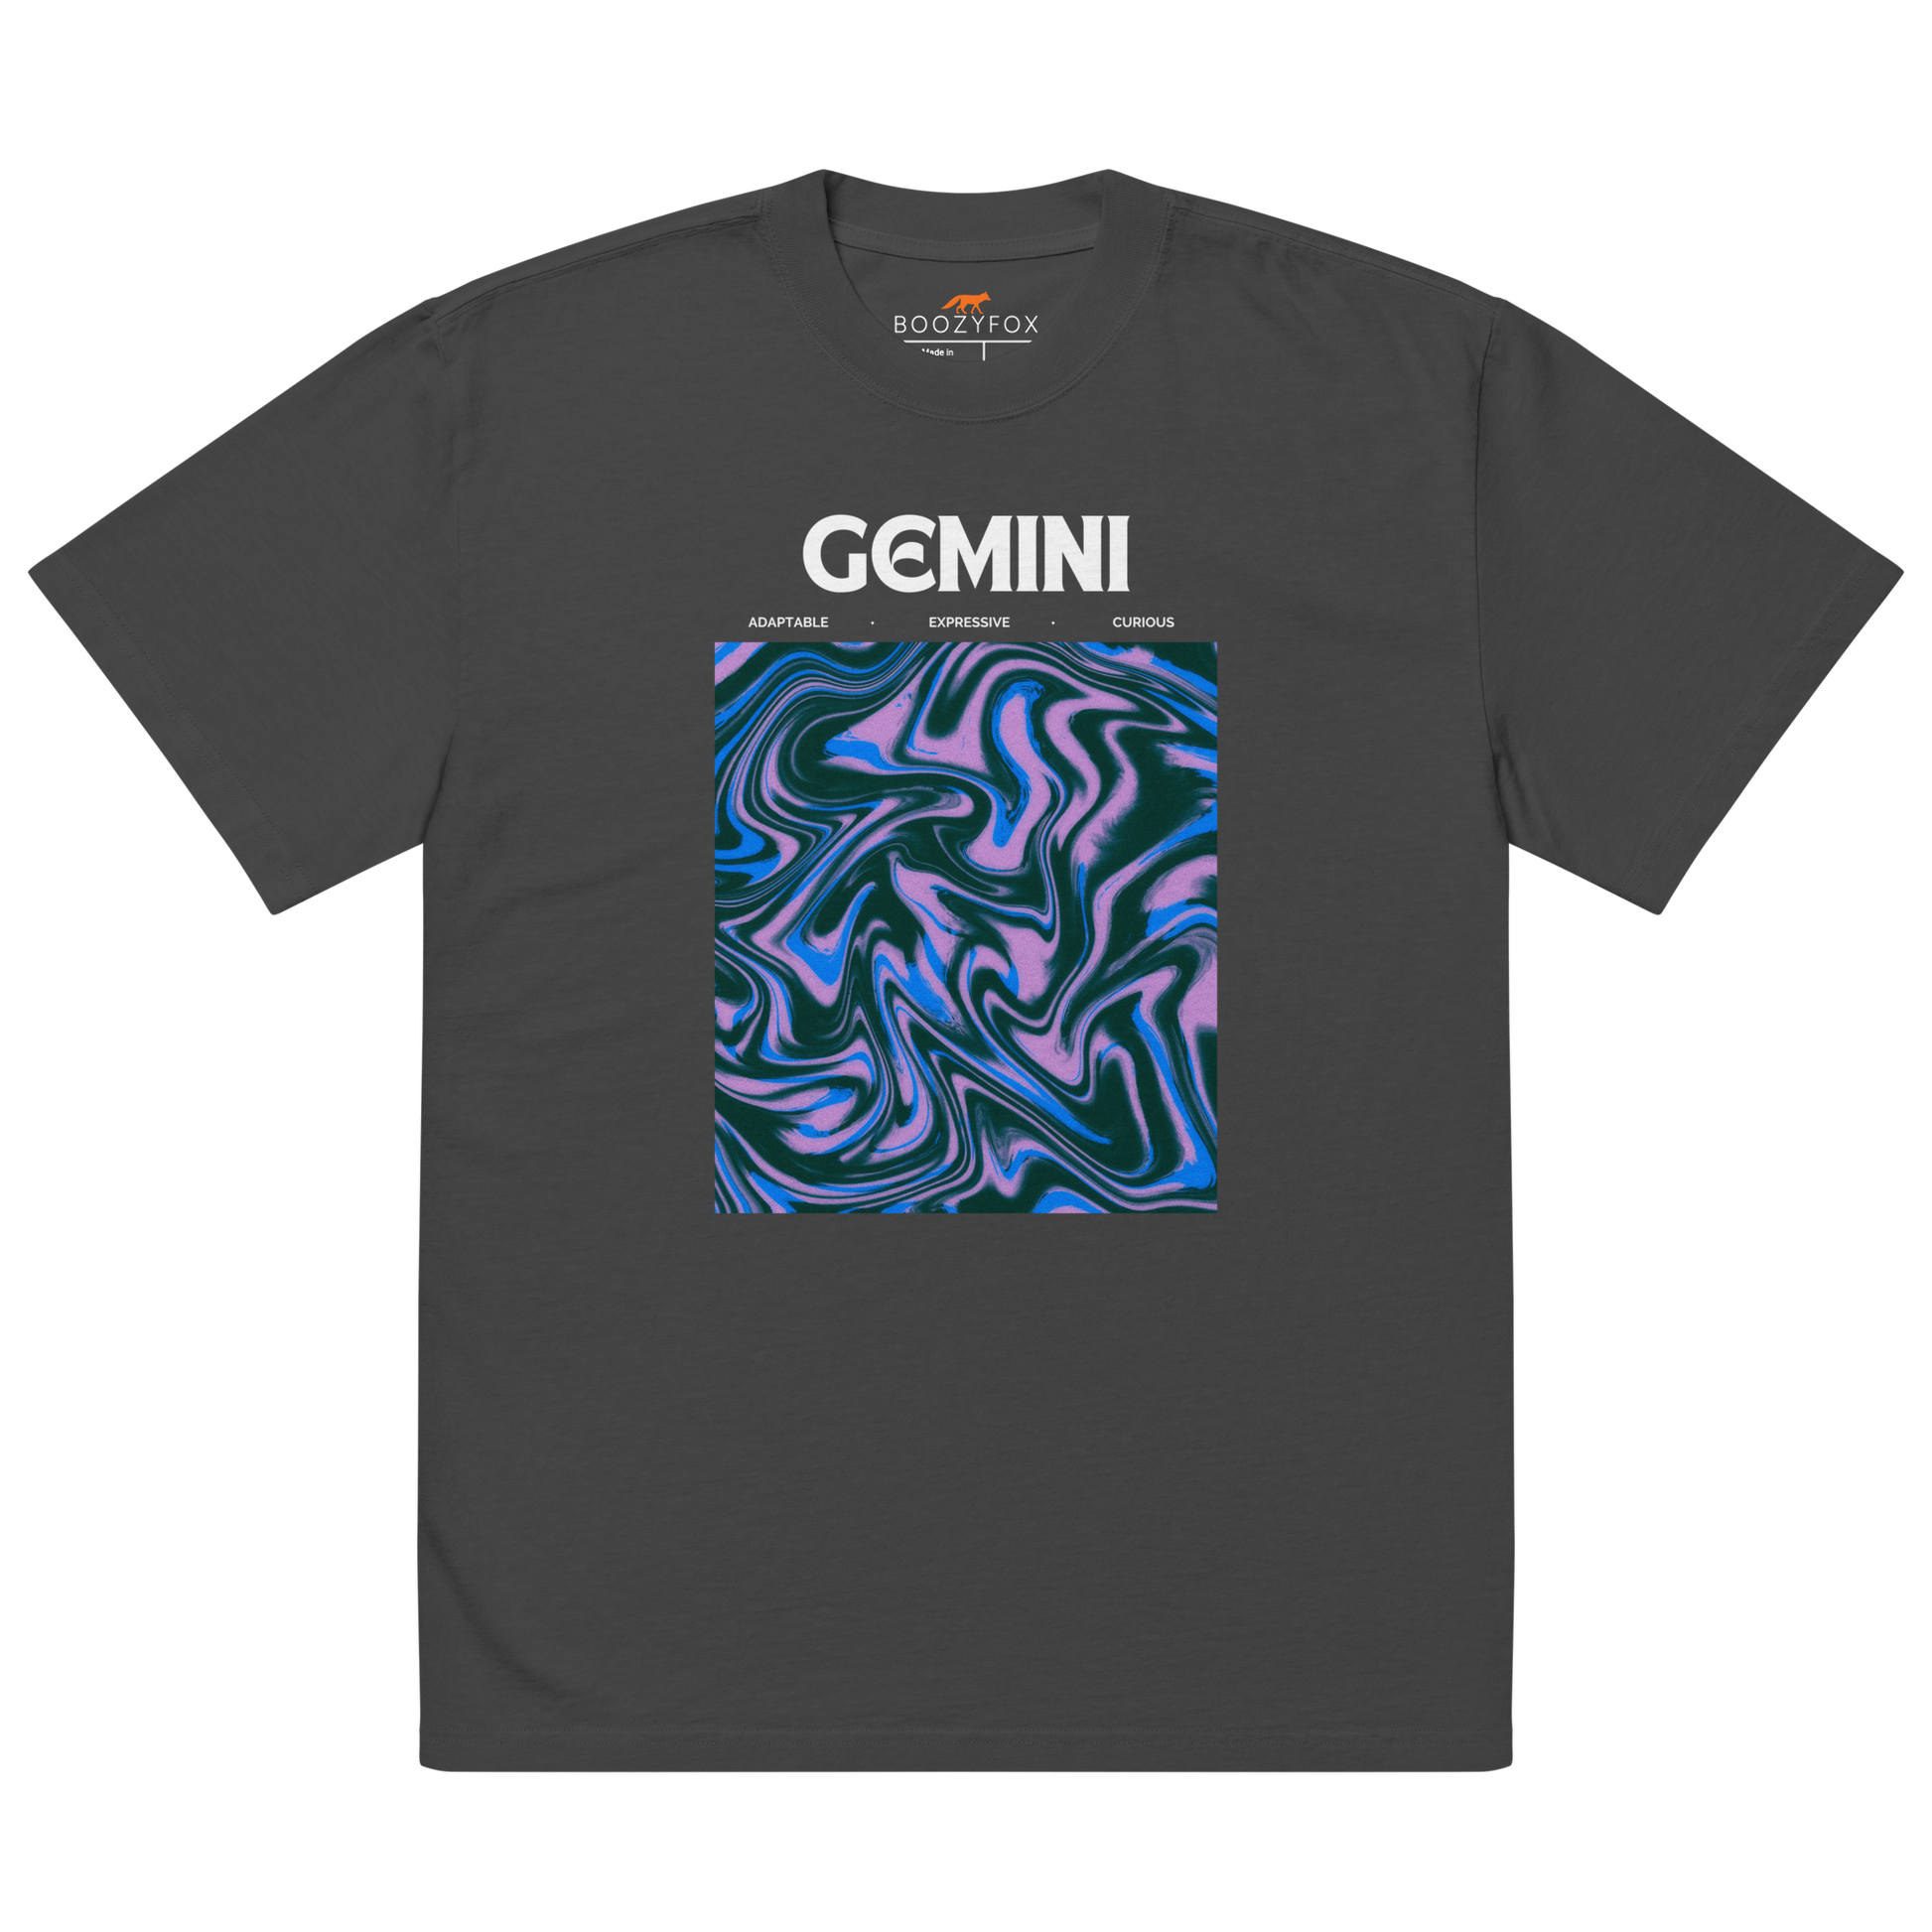 Faded Black Gemini Oversized T-Shirt featuring an Abstract Gemini Star Sign graphic on the chest - Cool Graphic Zodiac Oversized Tees - Boozy Fox